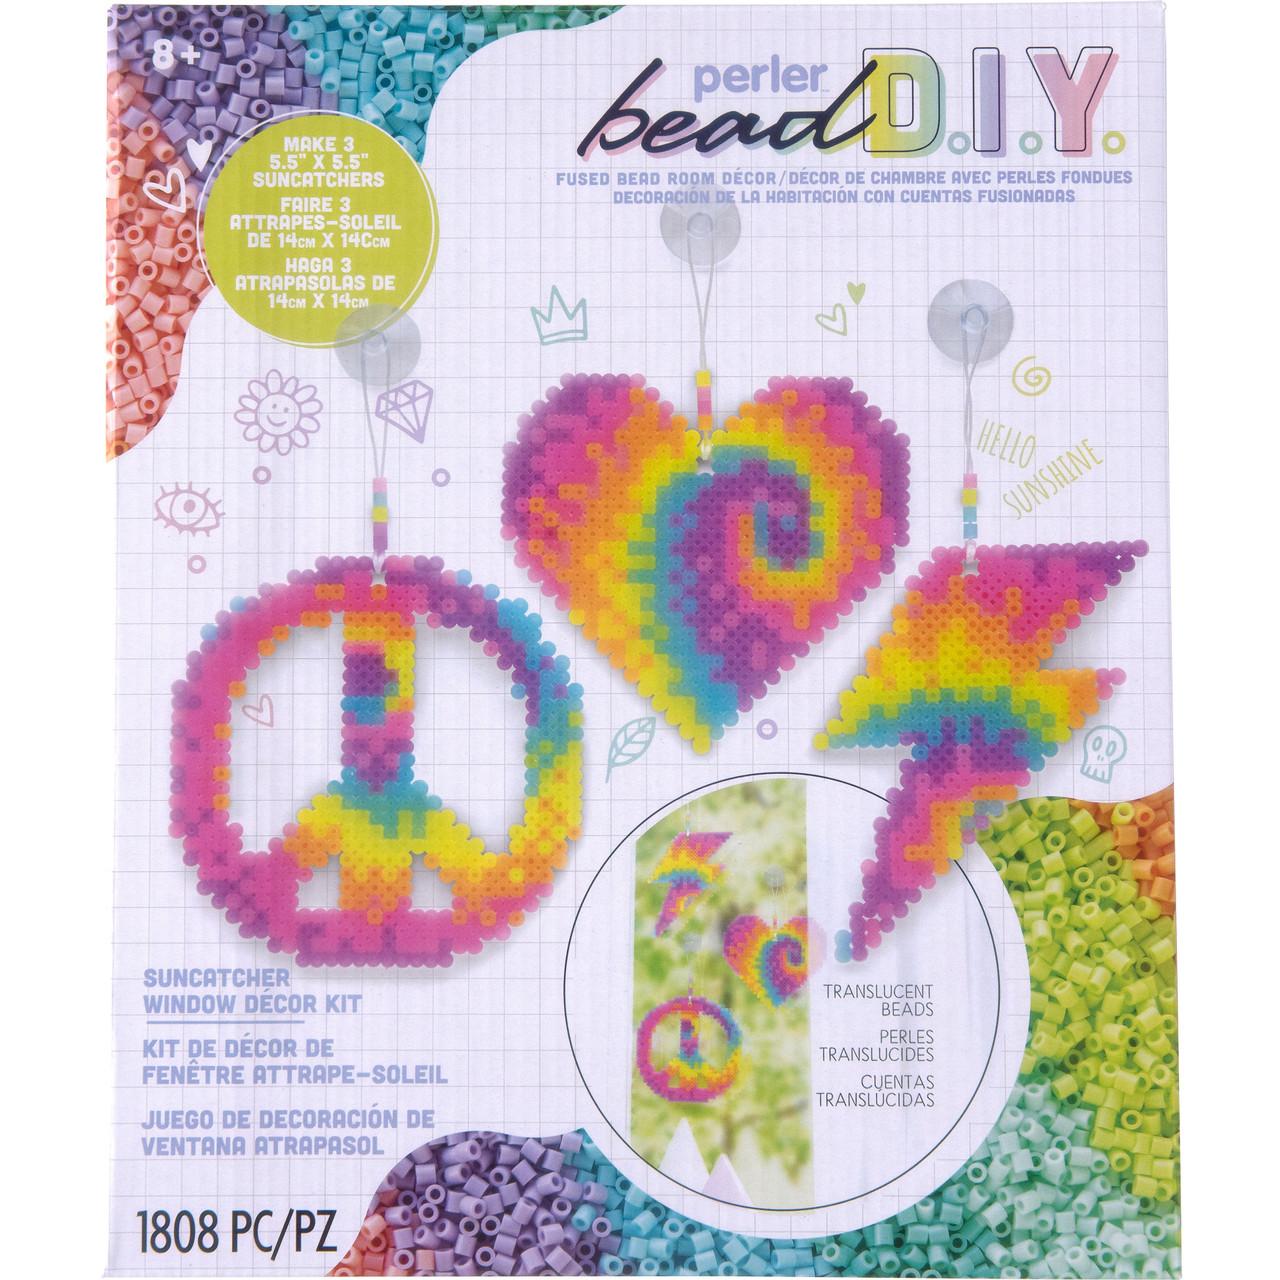 Creatology Valentine's Day Cactus Melty Bead Kit 178pc. Ages 5+